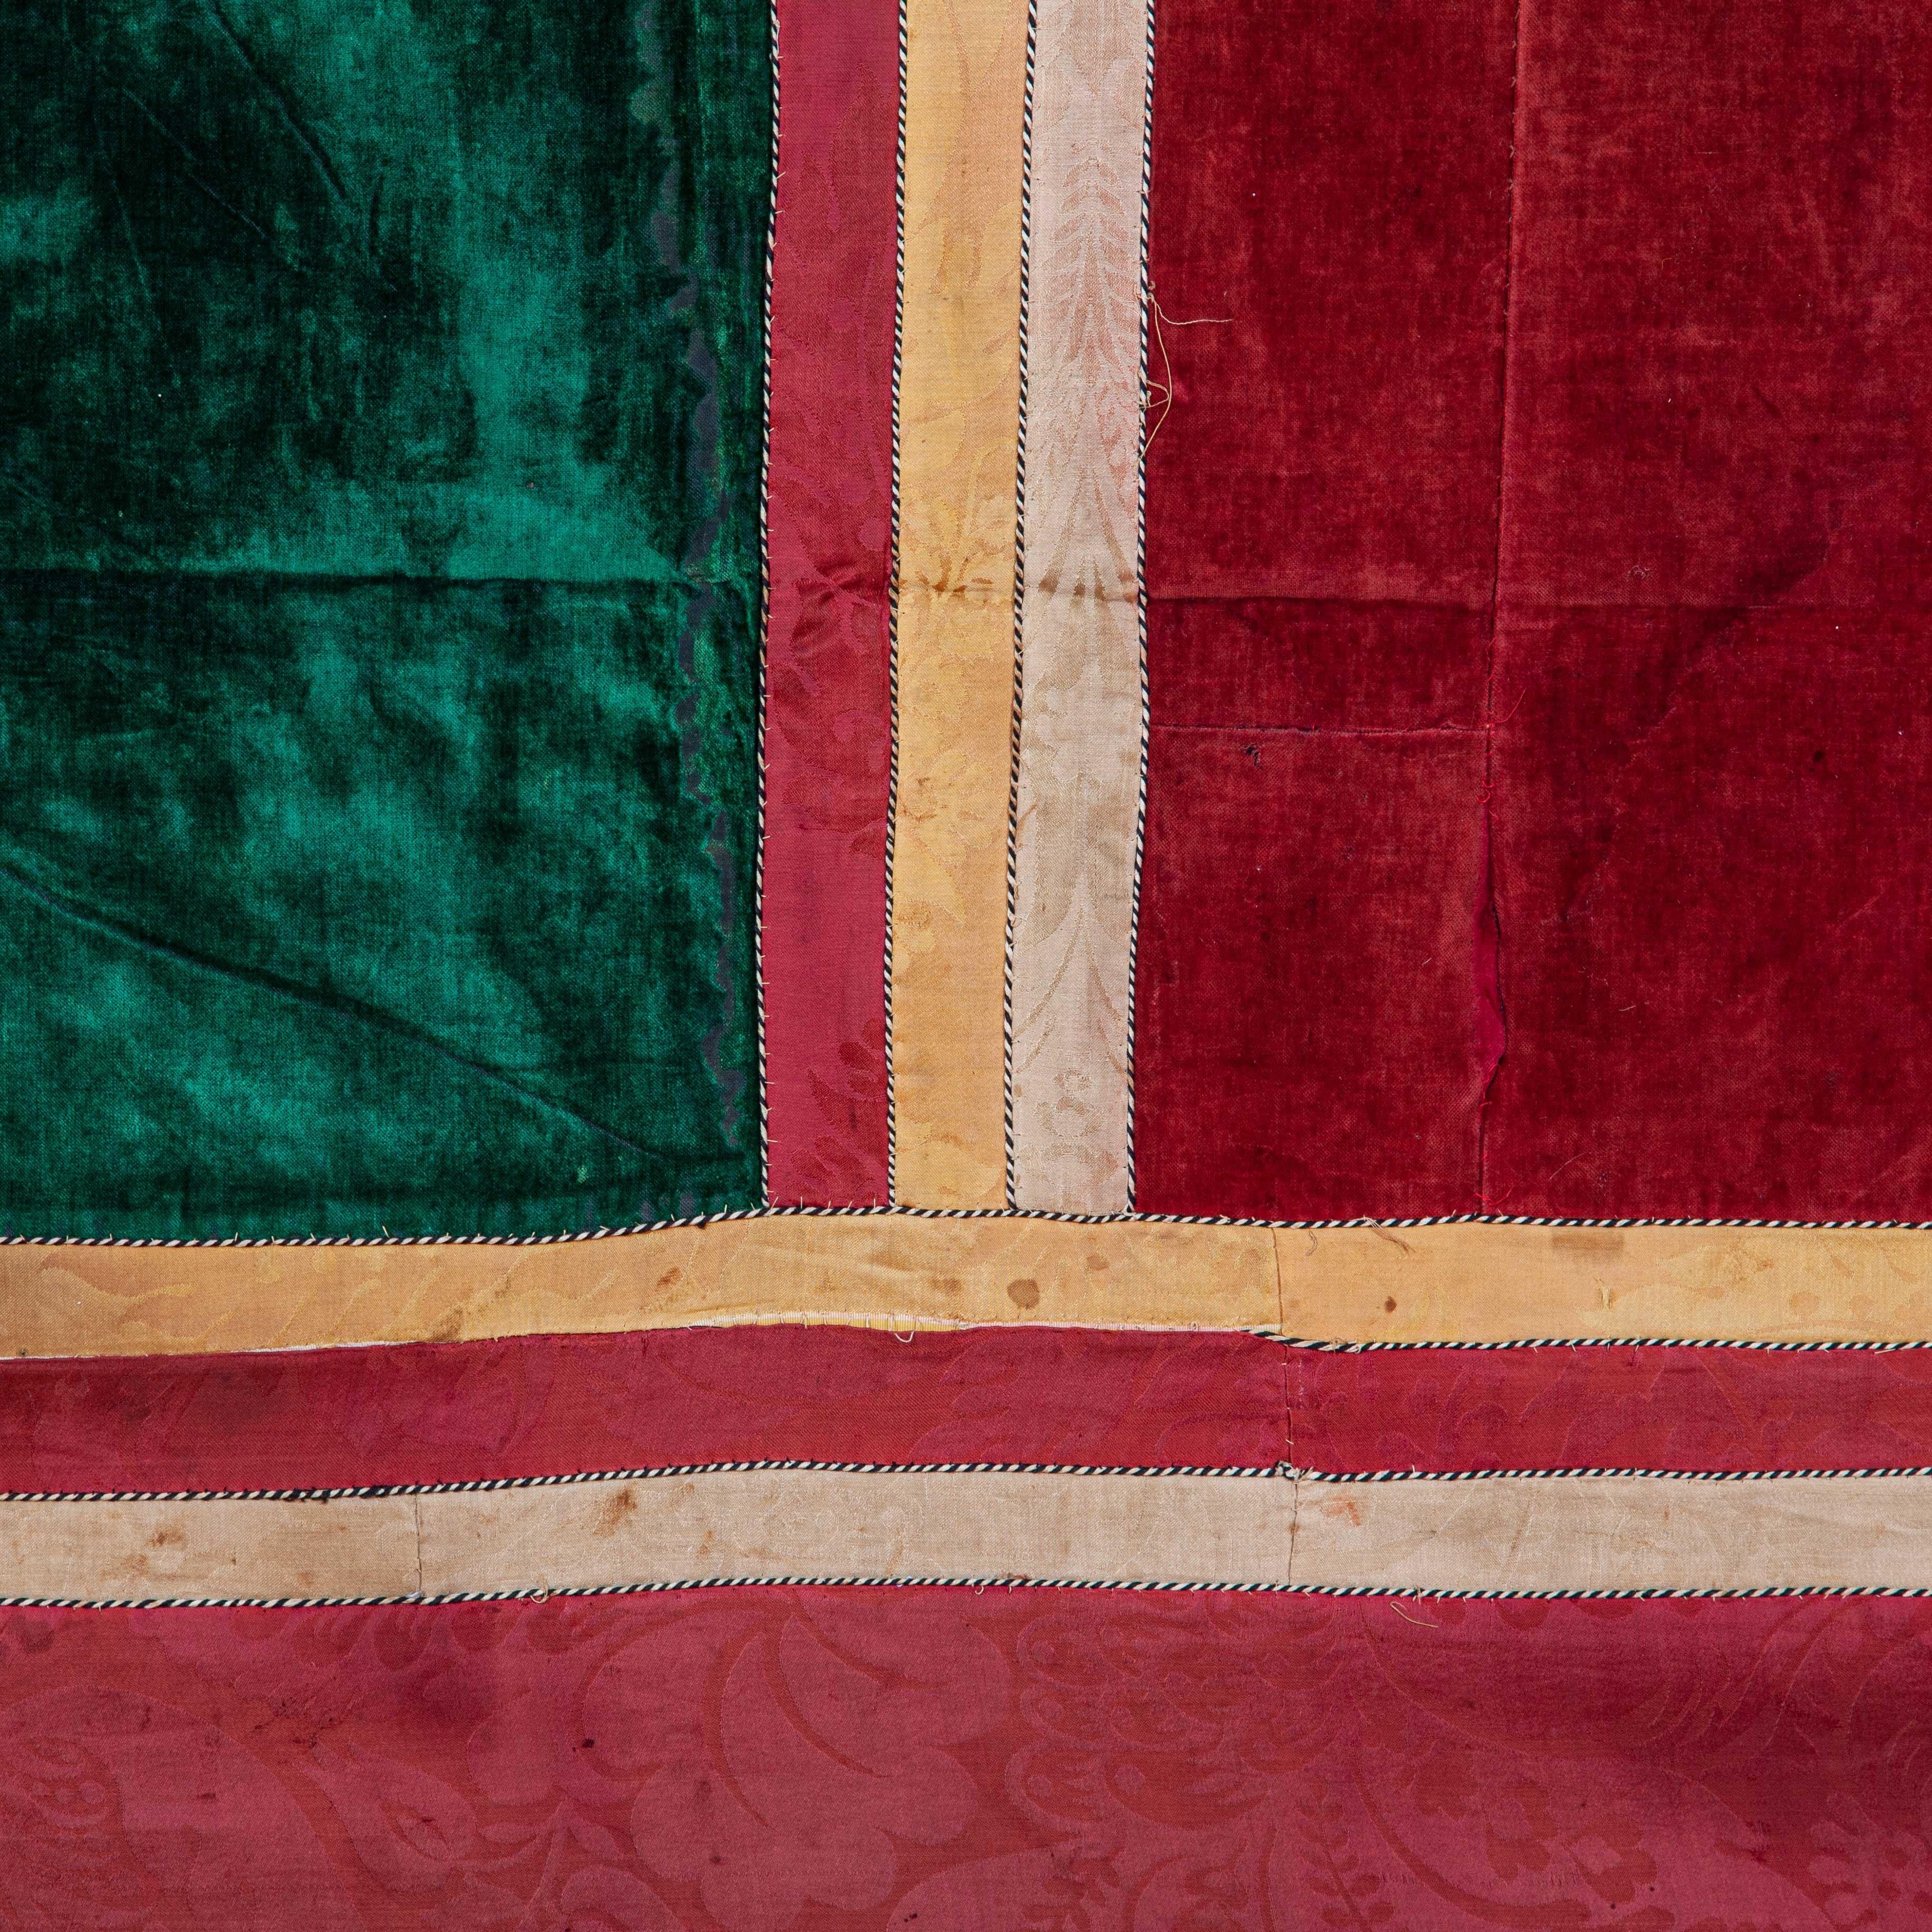 Panel is made of silk velvet and silk textiles, lined with heavy cotton.